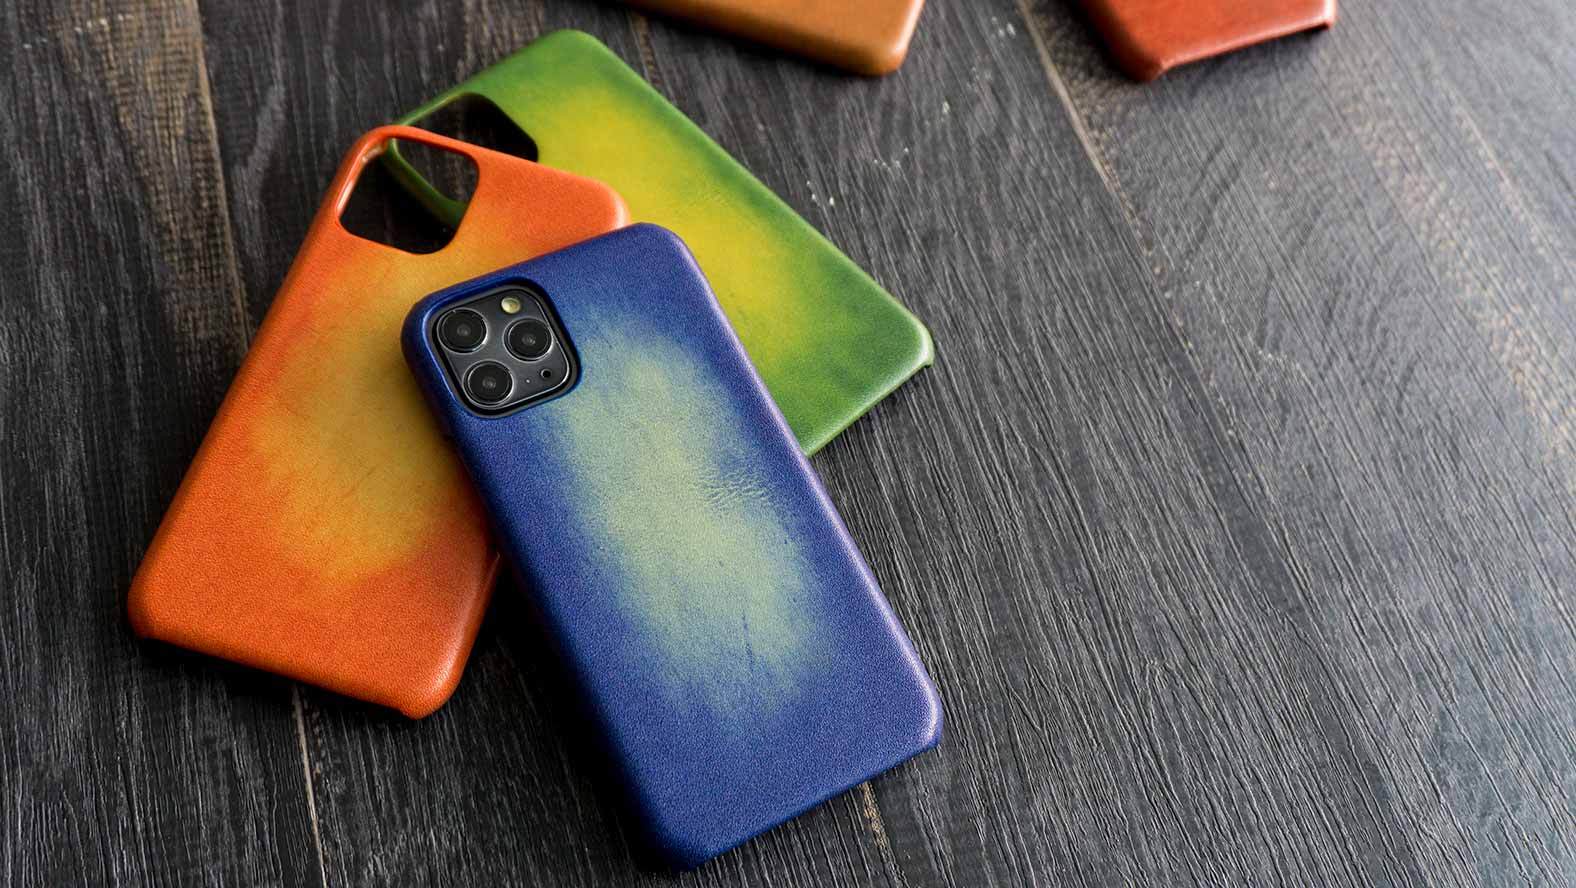 Smartphone cases with a hand-dyed natural leather look made with a UV printer